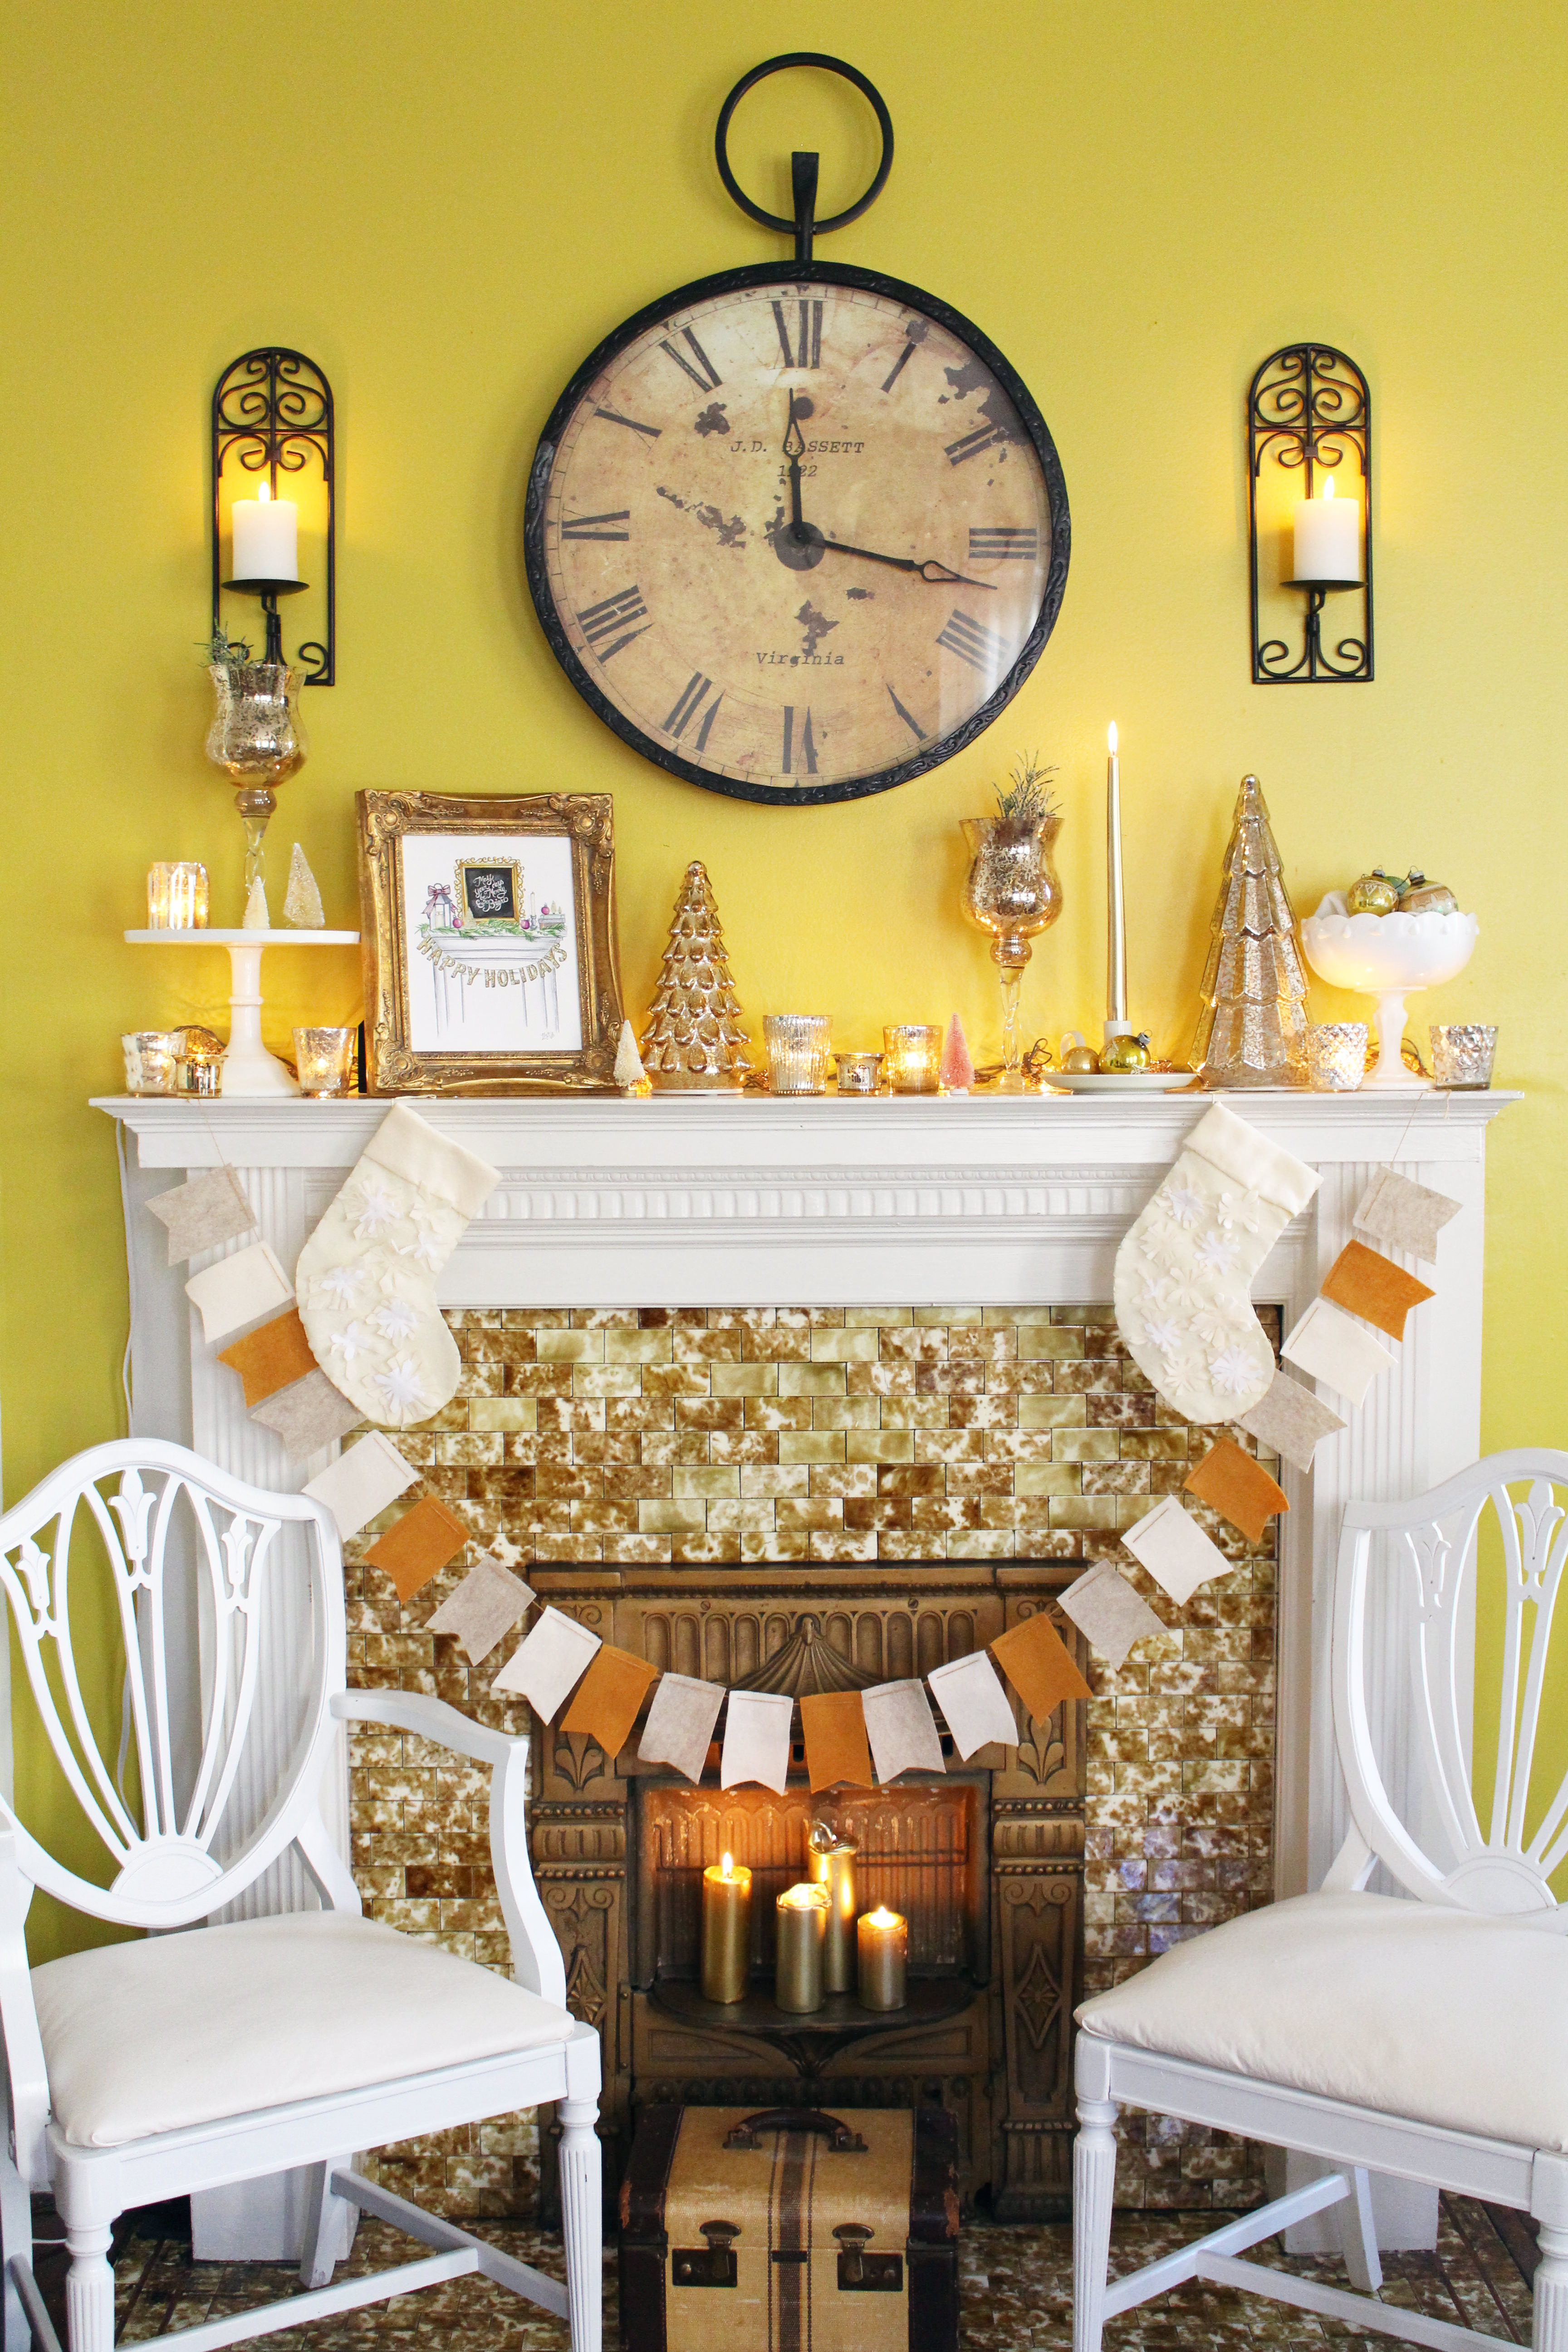 Holiday Mantel Styling Tip: keep your color palette simple